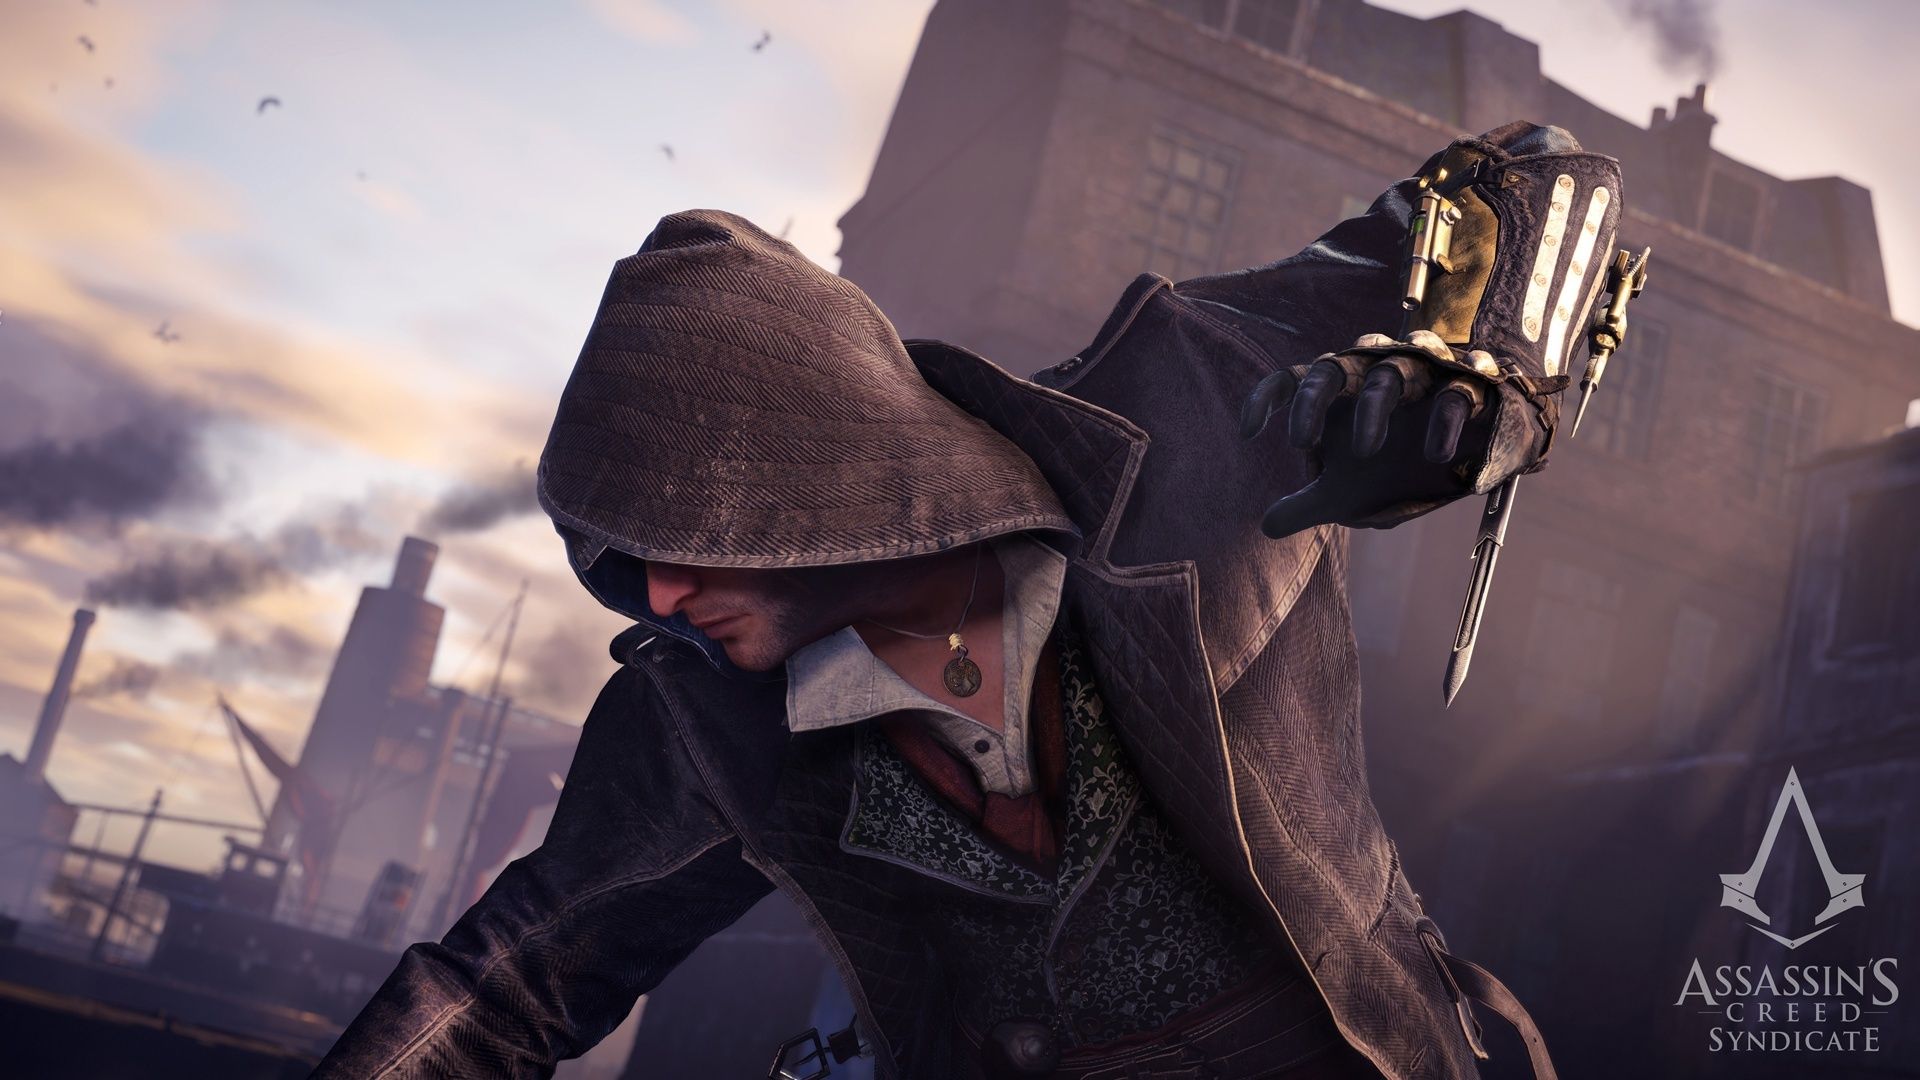 Jacob Frye Hidden Blade Assassins Creed Syndicate's Creed Syndicate